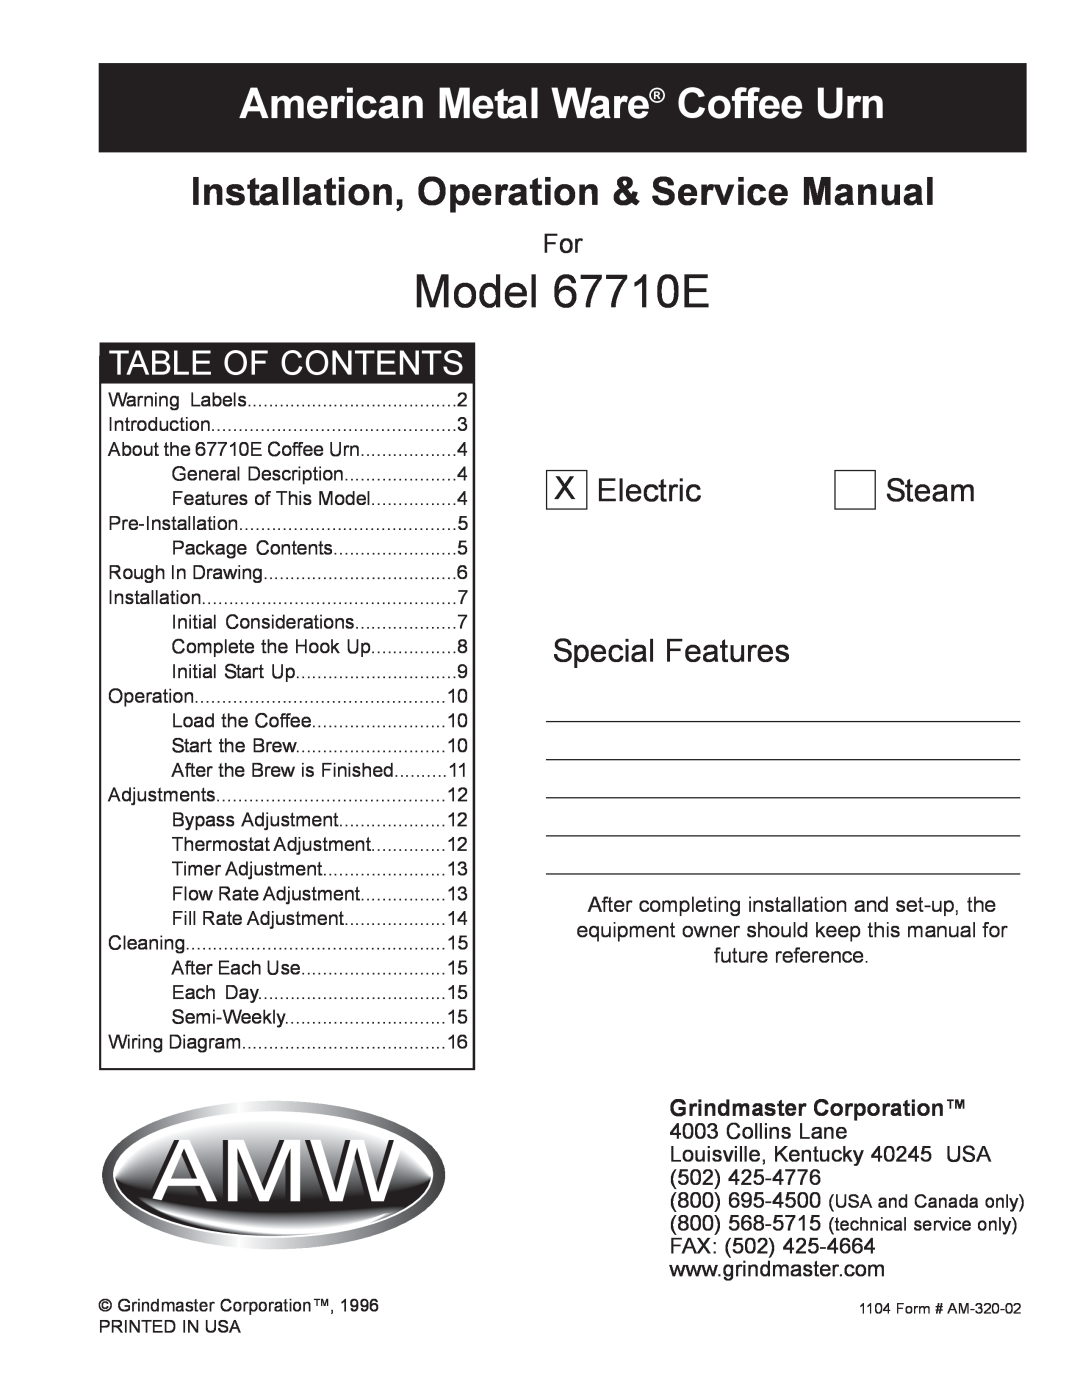 Grindmaster service manual Grindmaster Corporation, Model 67710E, American Metal Ware Coffee Urn, Table Of Contents 